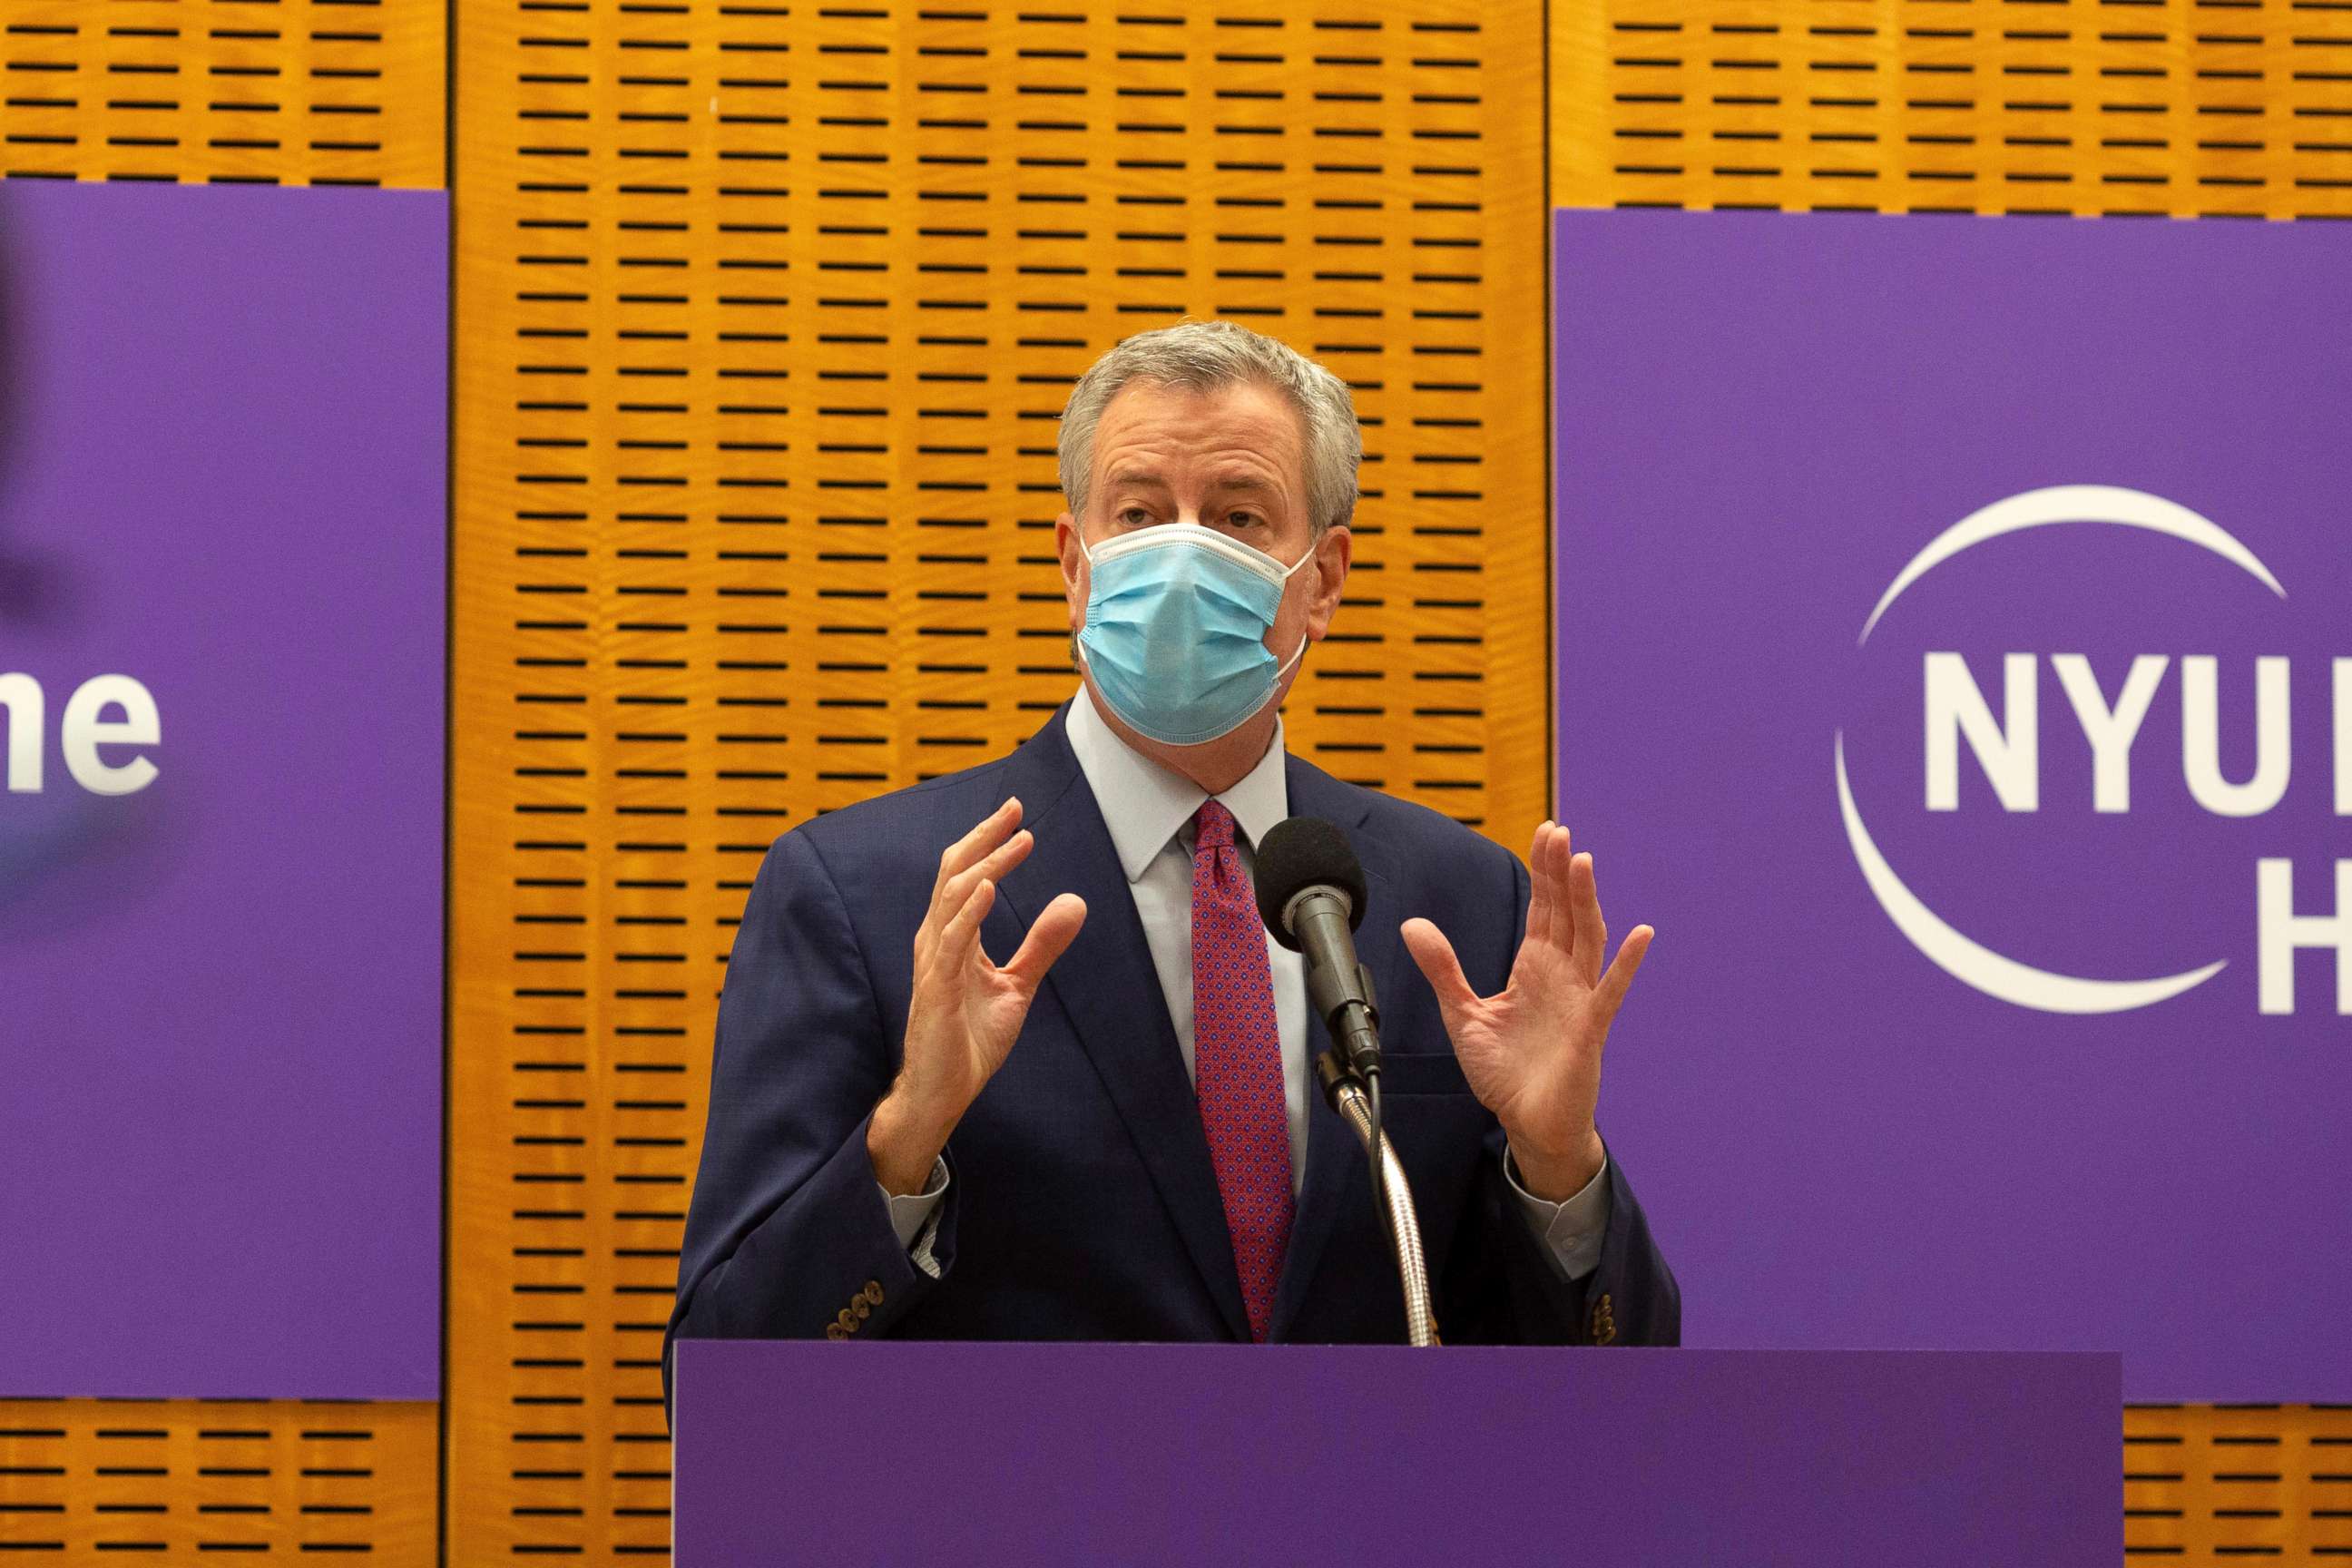 PHOTO: Mayor Bill de Blasio delivers remarks ahead of the first COVID-19 vaccinations at NYU-Langone Hospital, Dec. 14, 2020, in New York.